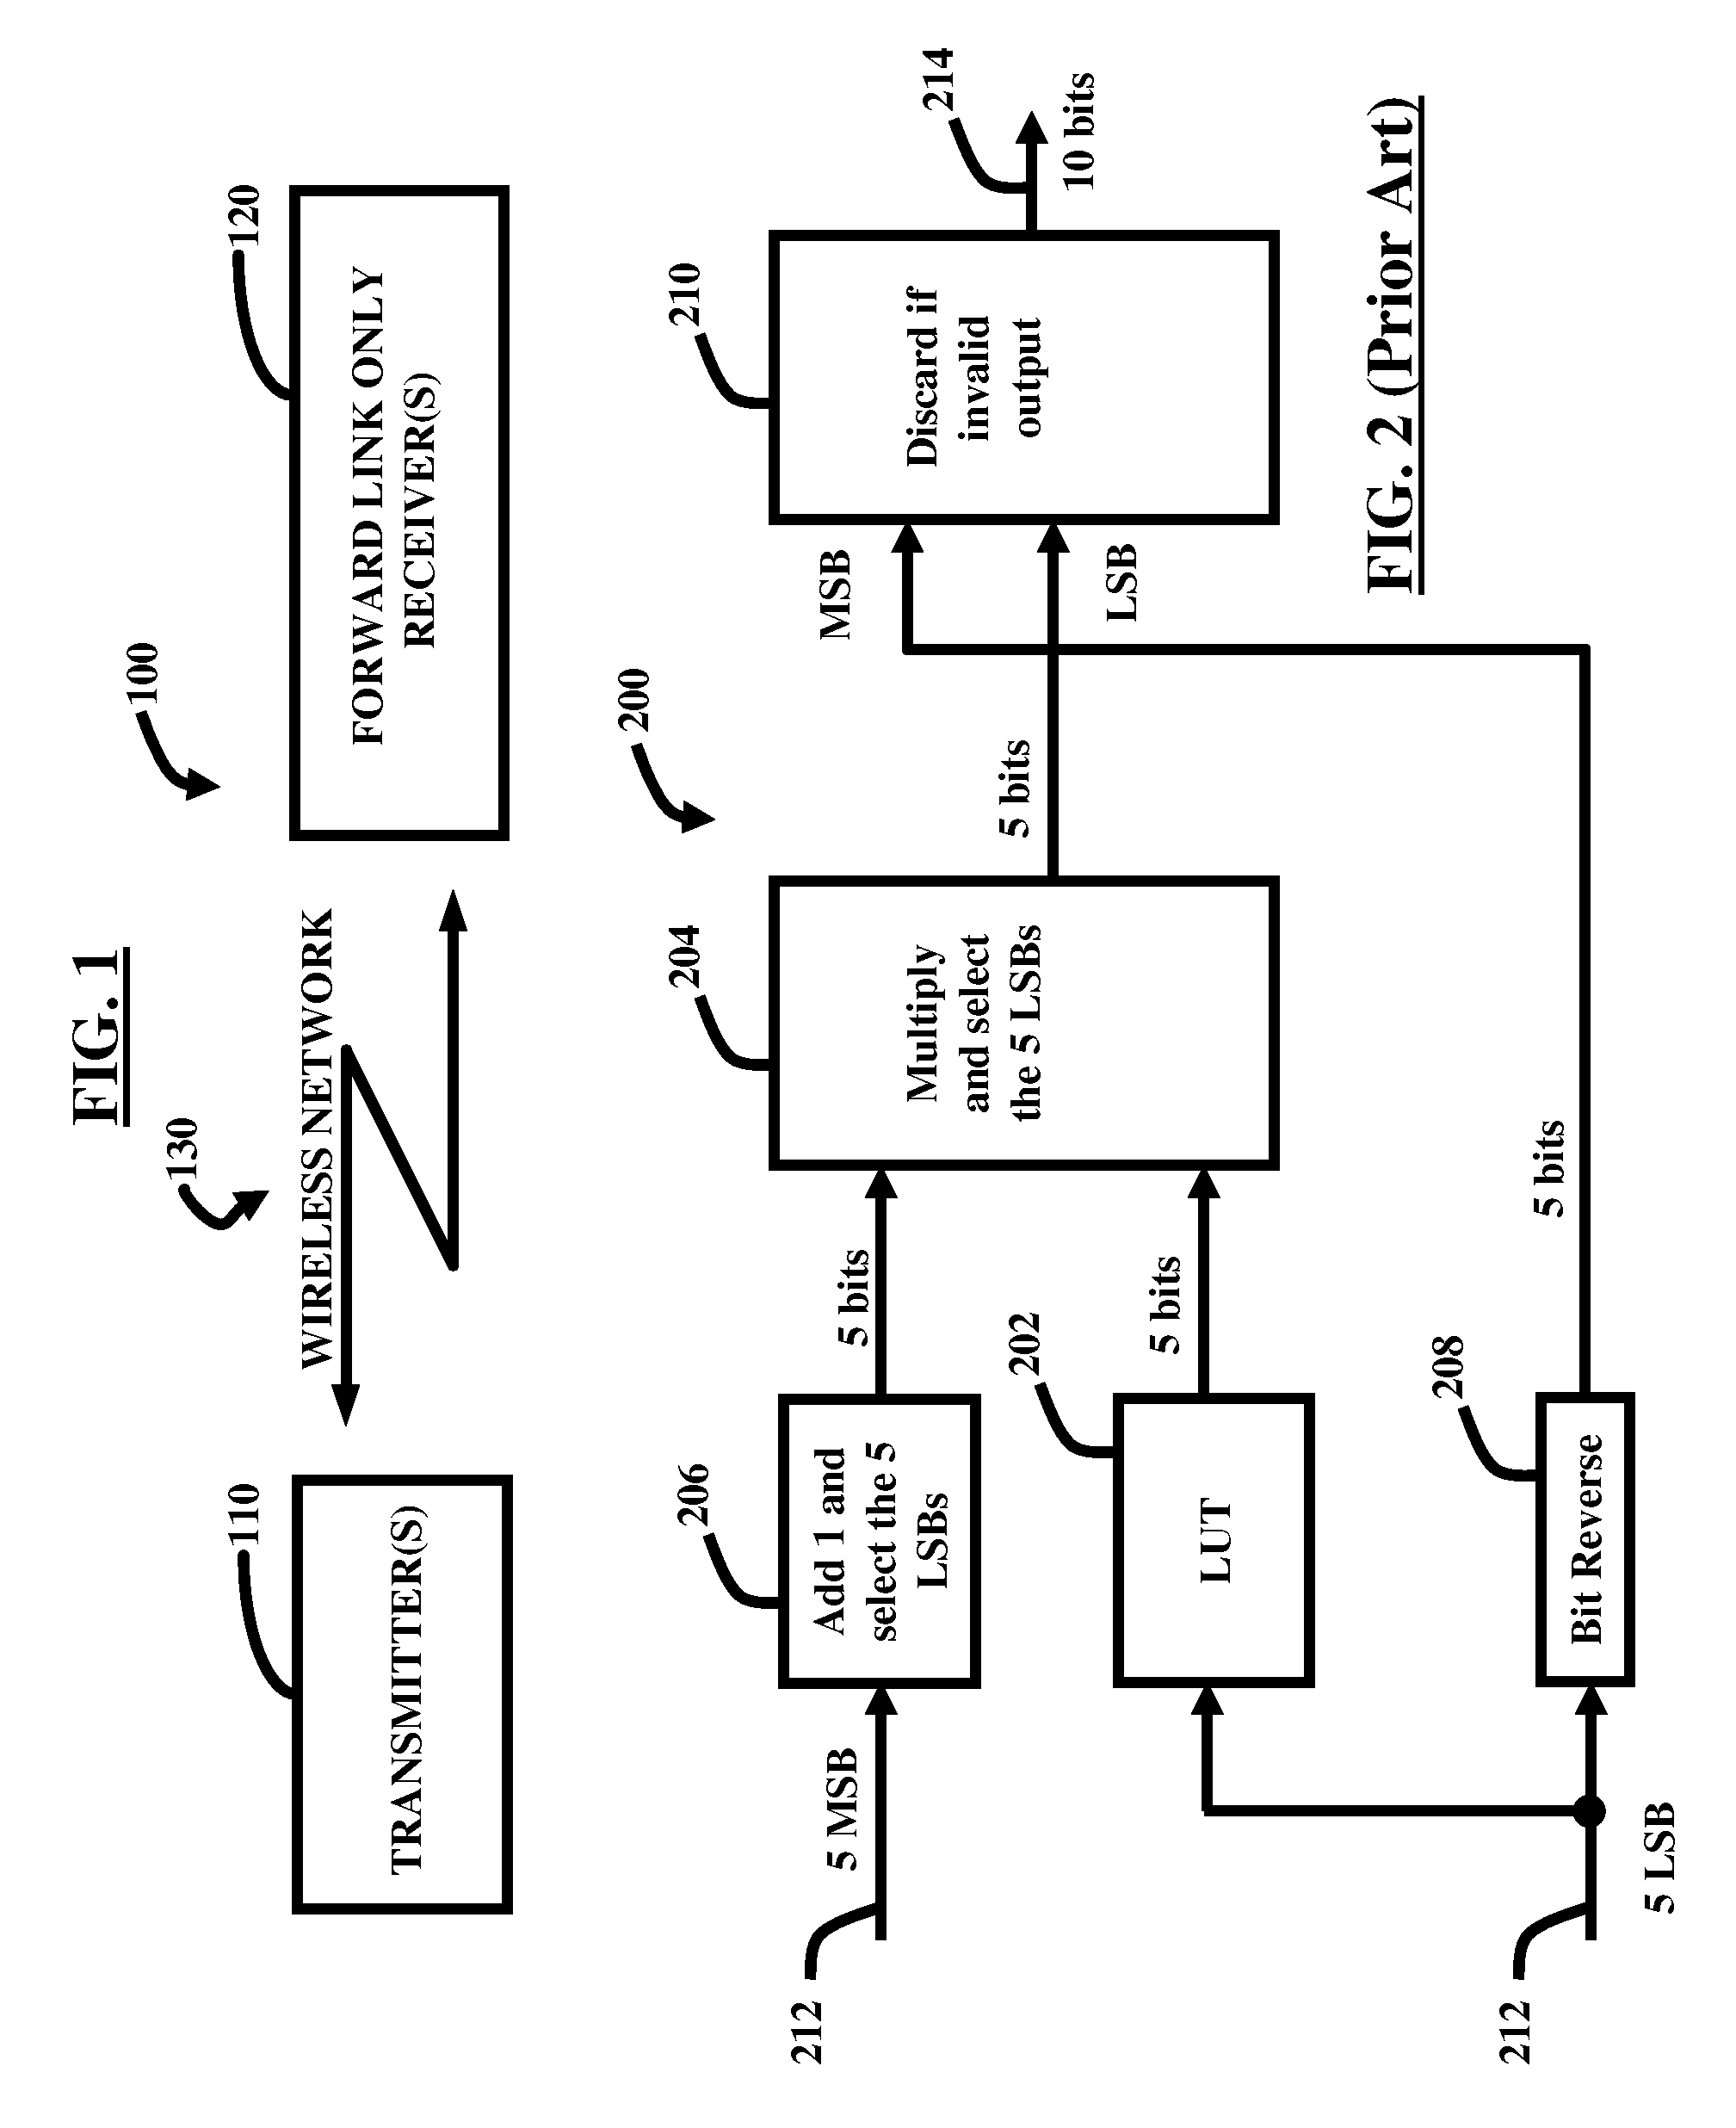 Interleaver address generation in turbo decoders for mobile multimedia multicast system communication systems